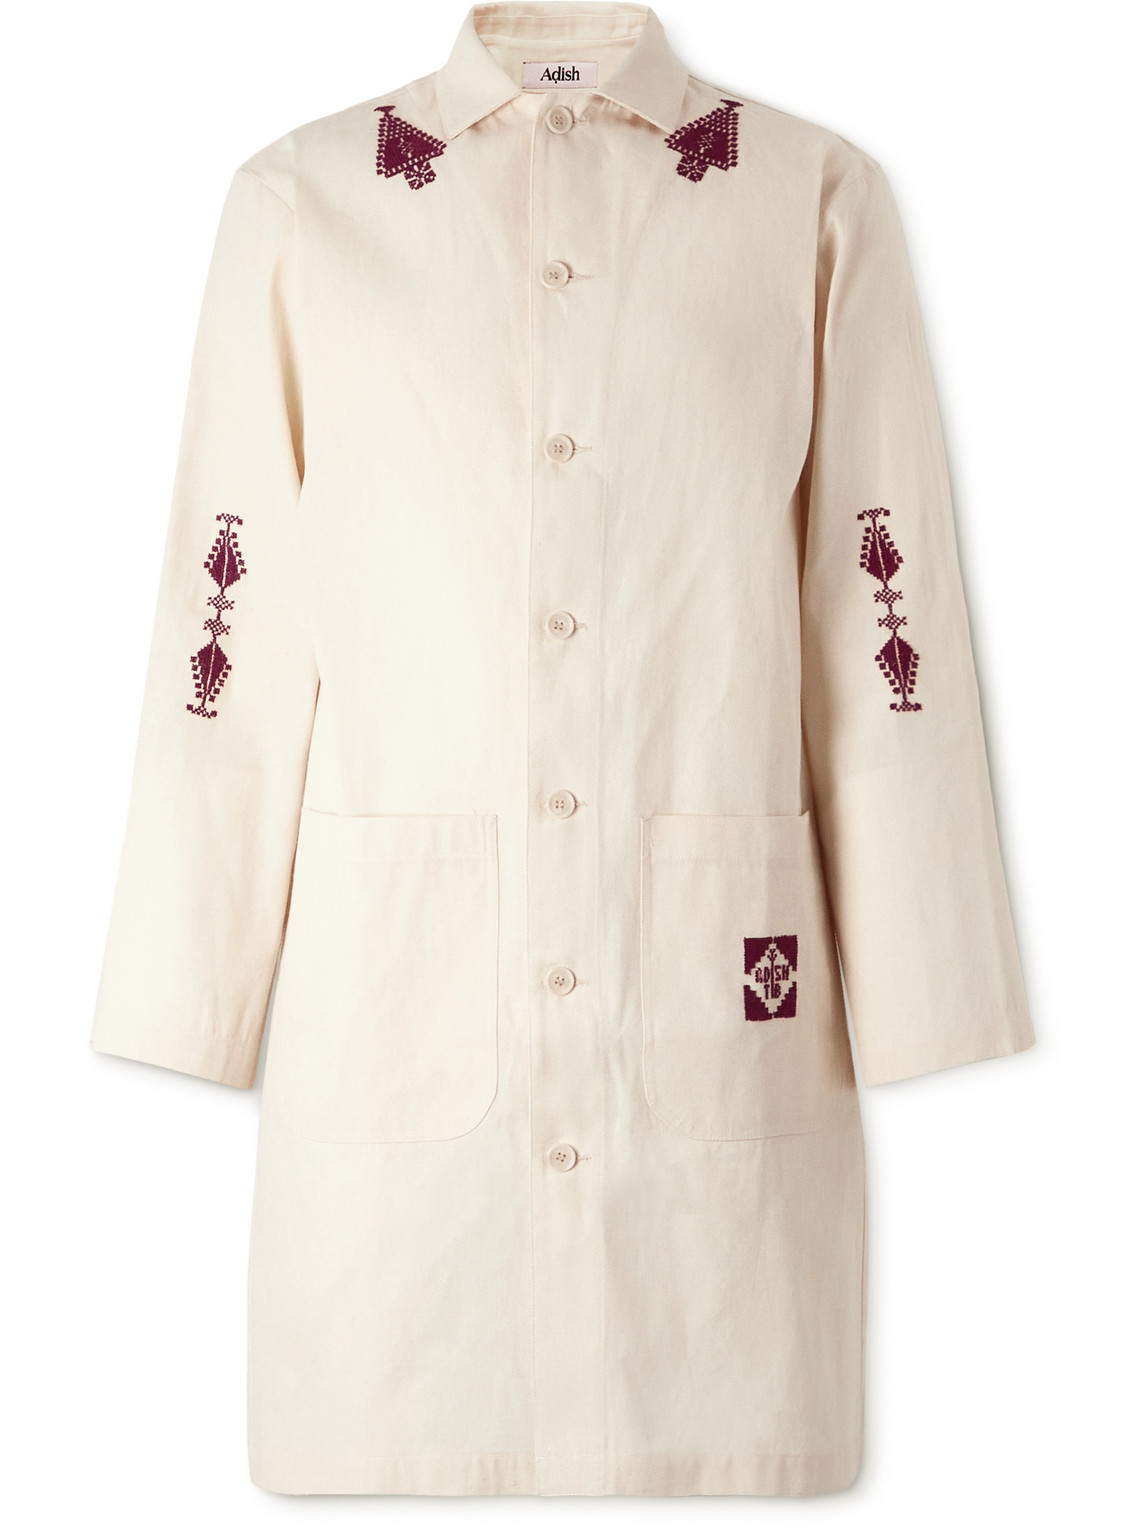 ADISH THE INOUE BROTHERS MAKHLUT EMBROIDERED COTTON-CANVAS COAT